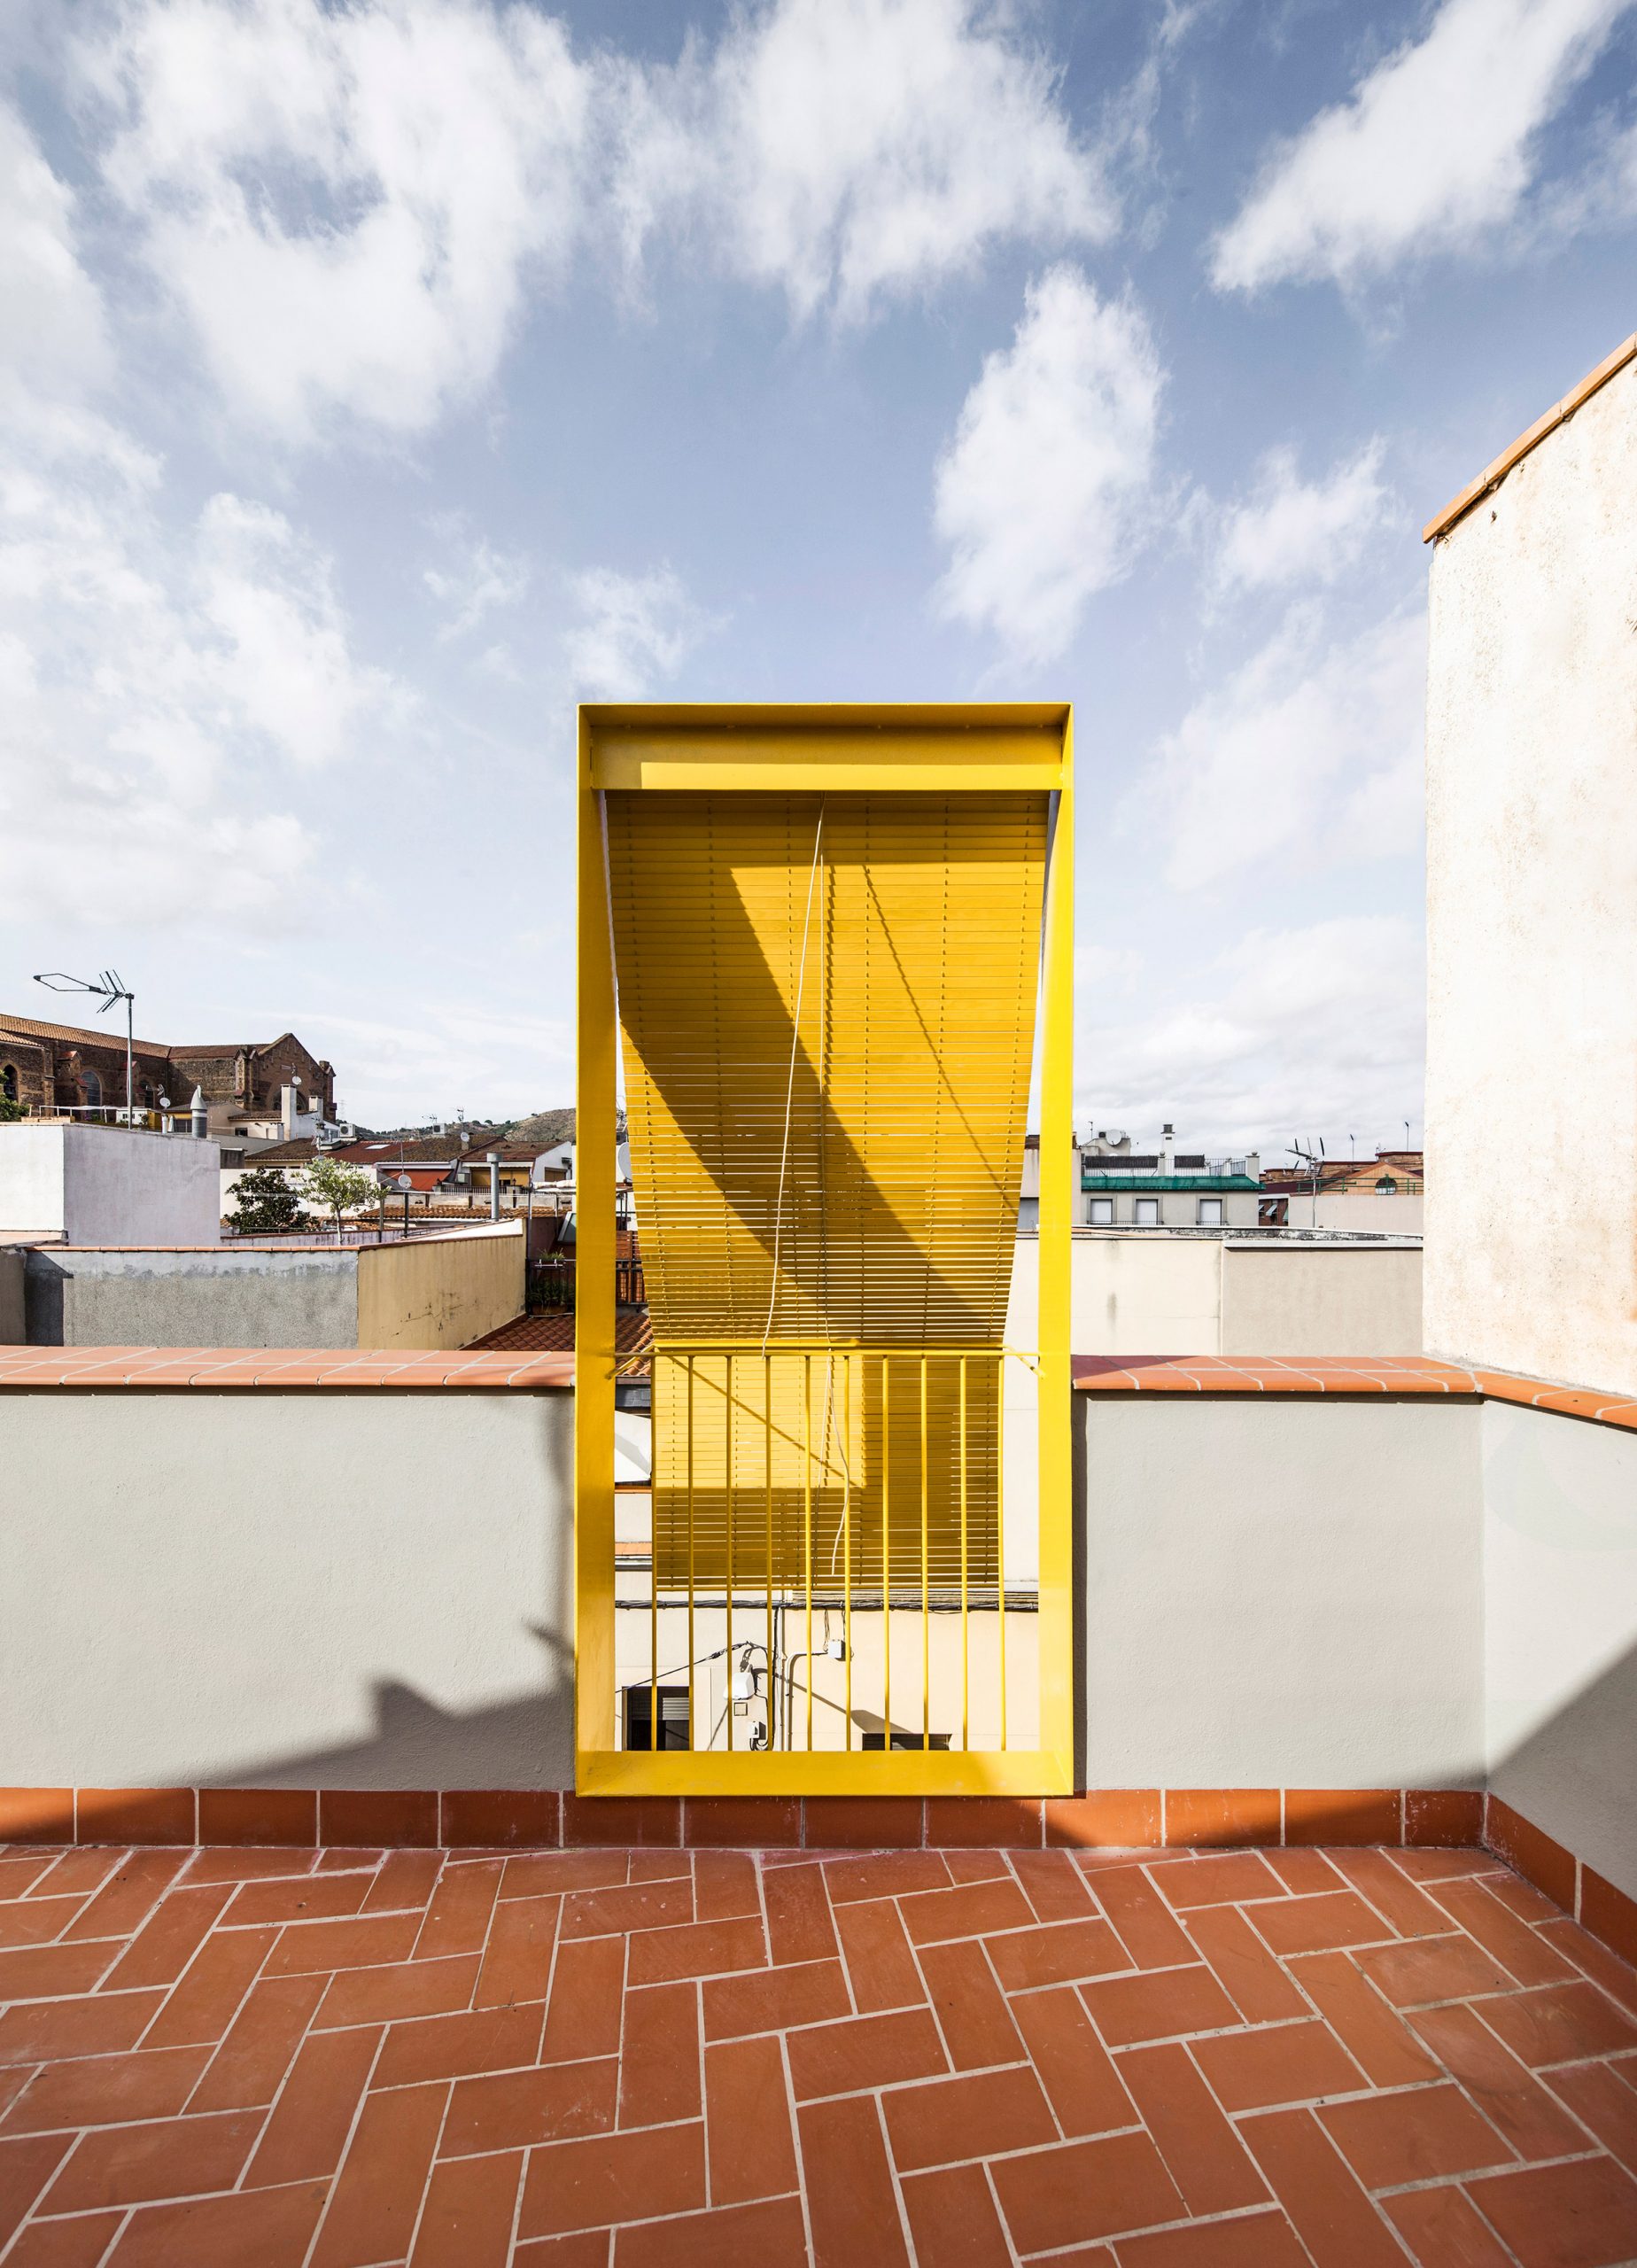 The roof terrace has terracotta tiles by Anna & Eugeni Bach